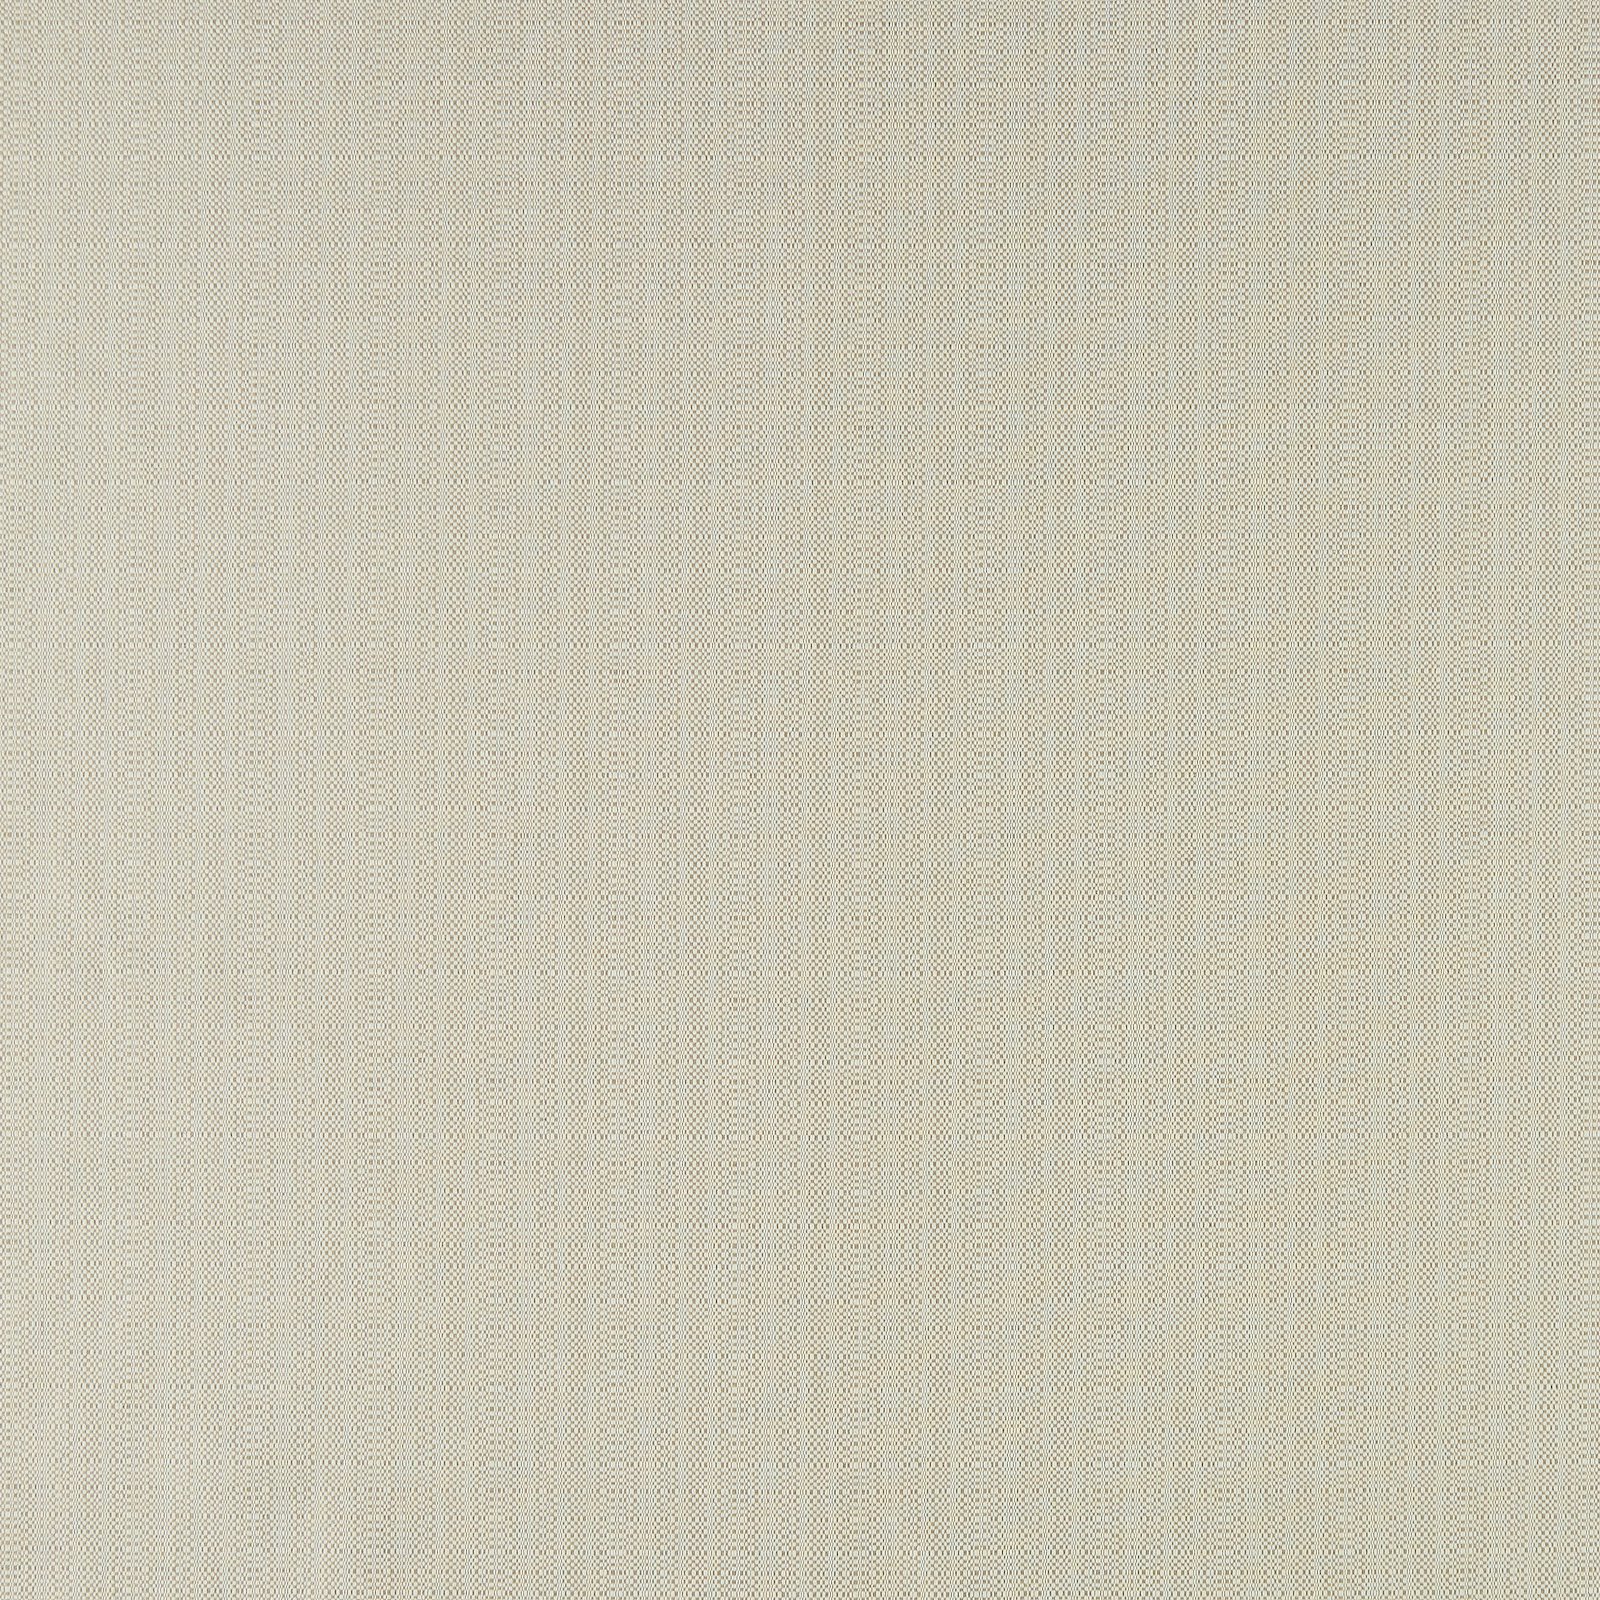 Recycled jacquard offwhite/sand pattern 826480_pack_sp